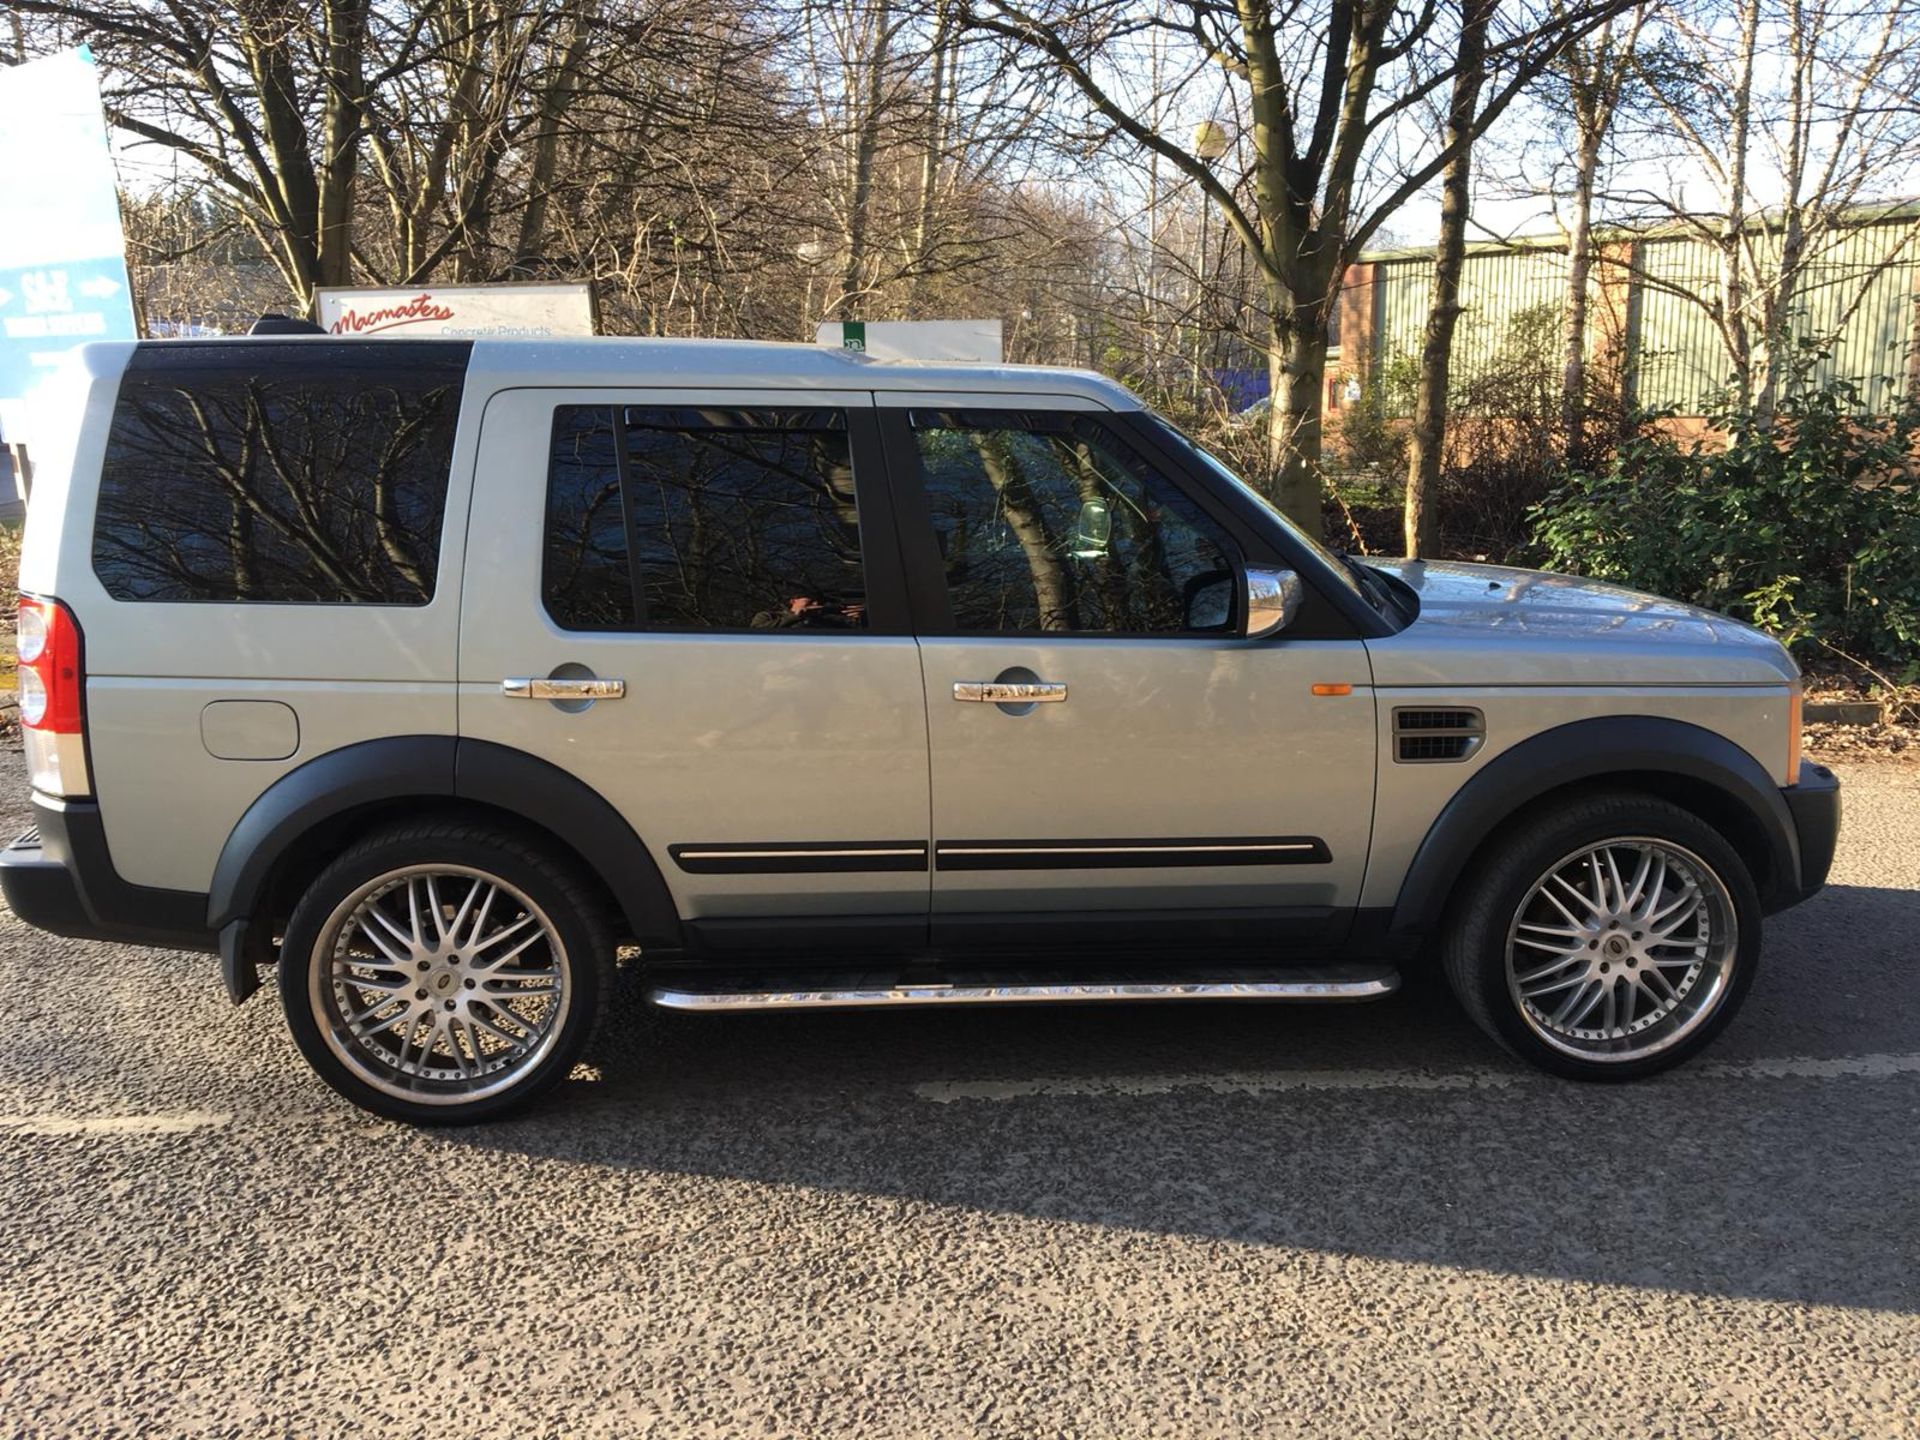 2006/06 REG LAND ROVER DISCOVERY 3 TDV6 S AUTOMATIC SILVER DIESEL 4X4 *PLUS VAT*